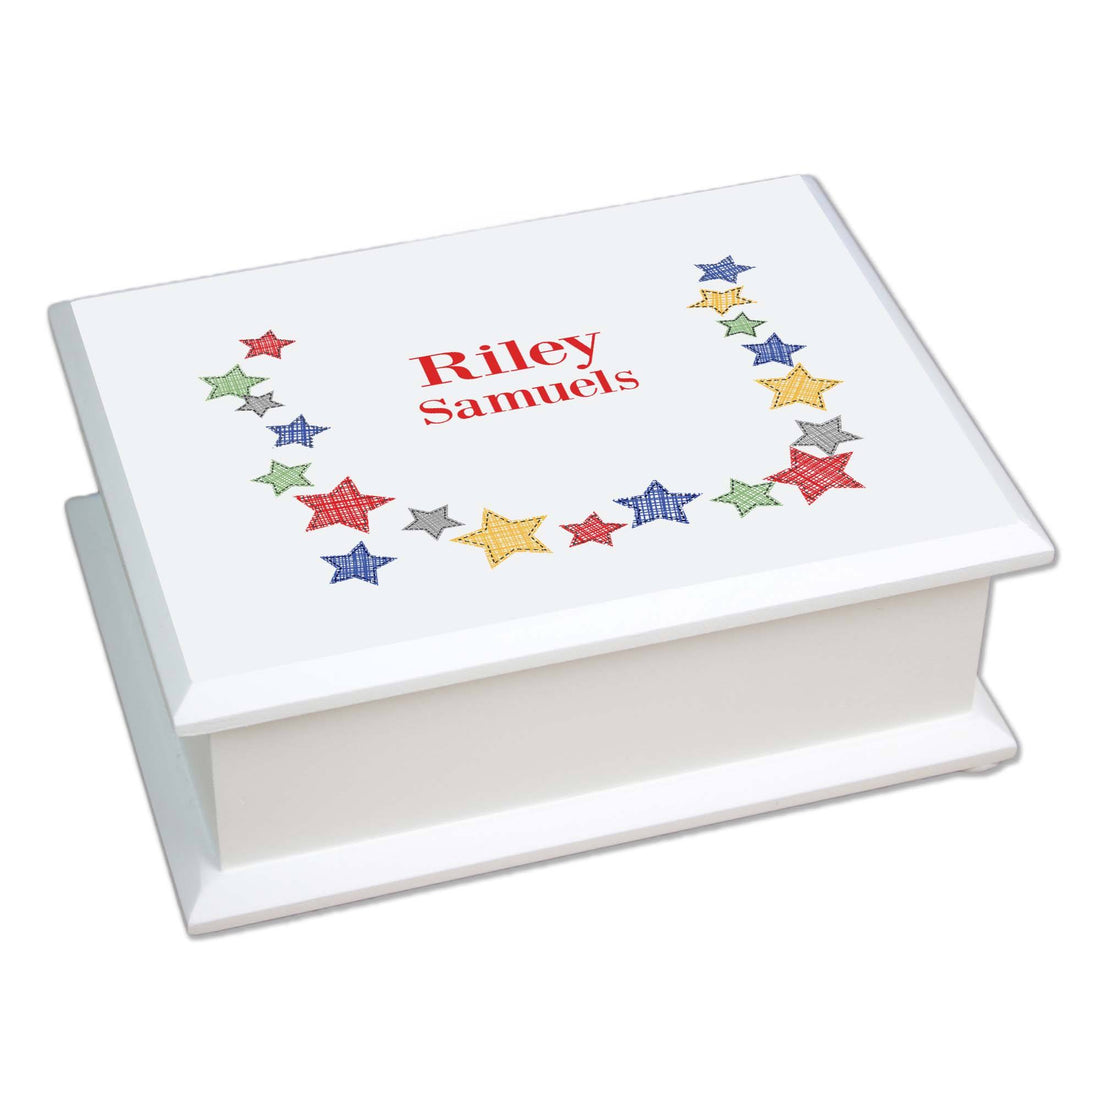 Personalized Lift Top Jewelry Box with Stitched Stars design